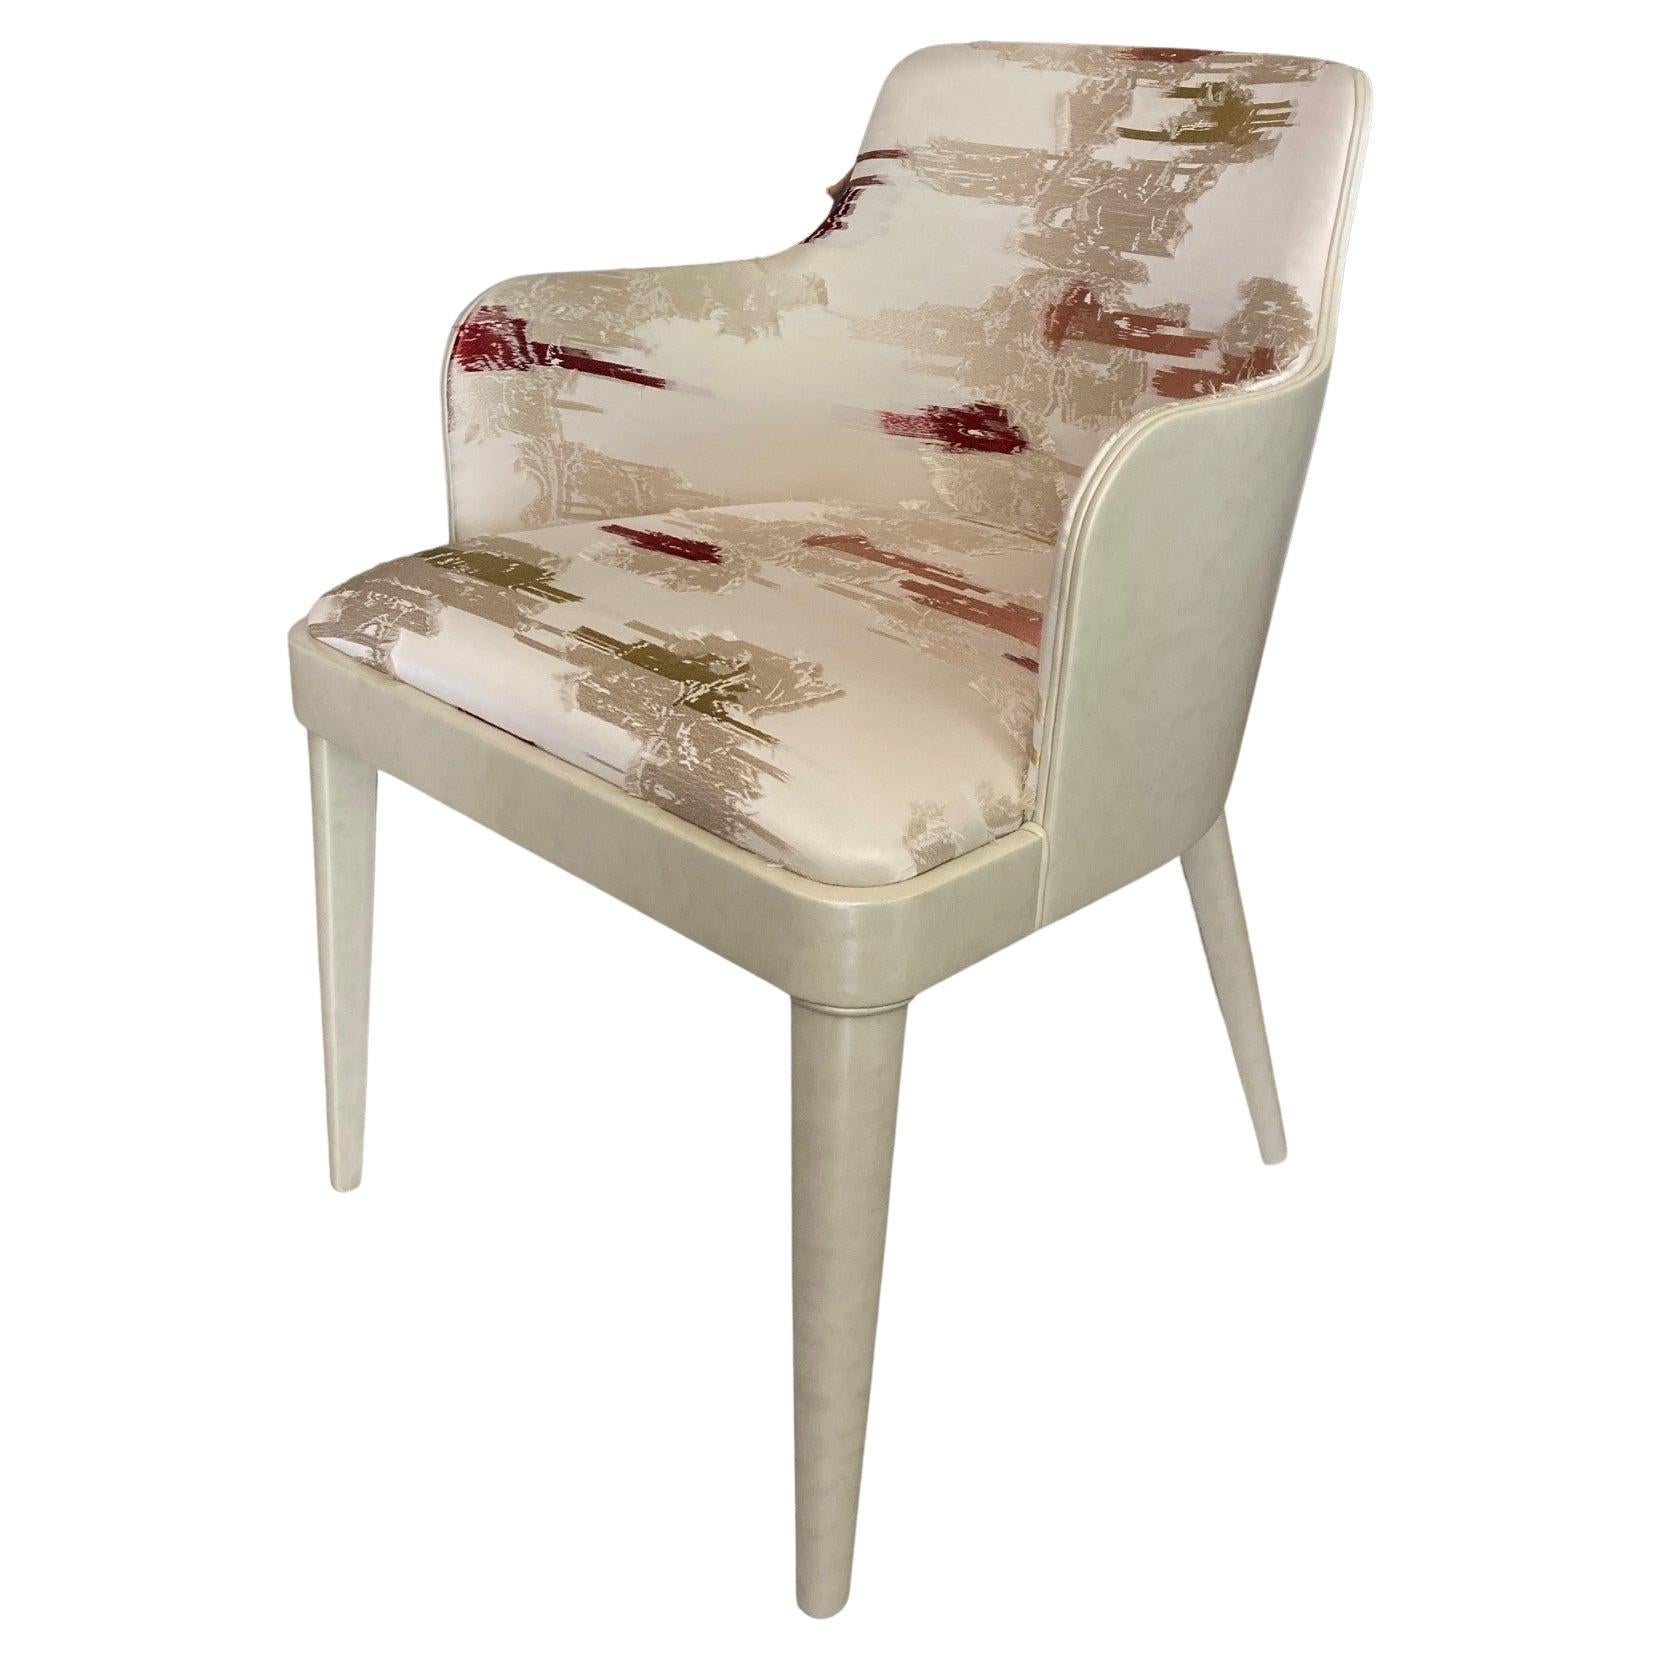 Lola Royale, the Classic Upholstered Armchair Covered with Fine Fabric